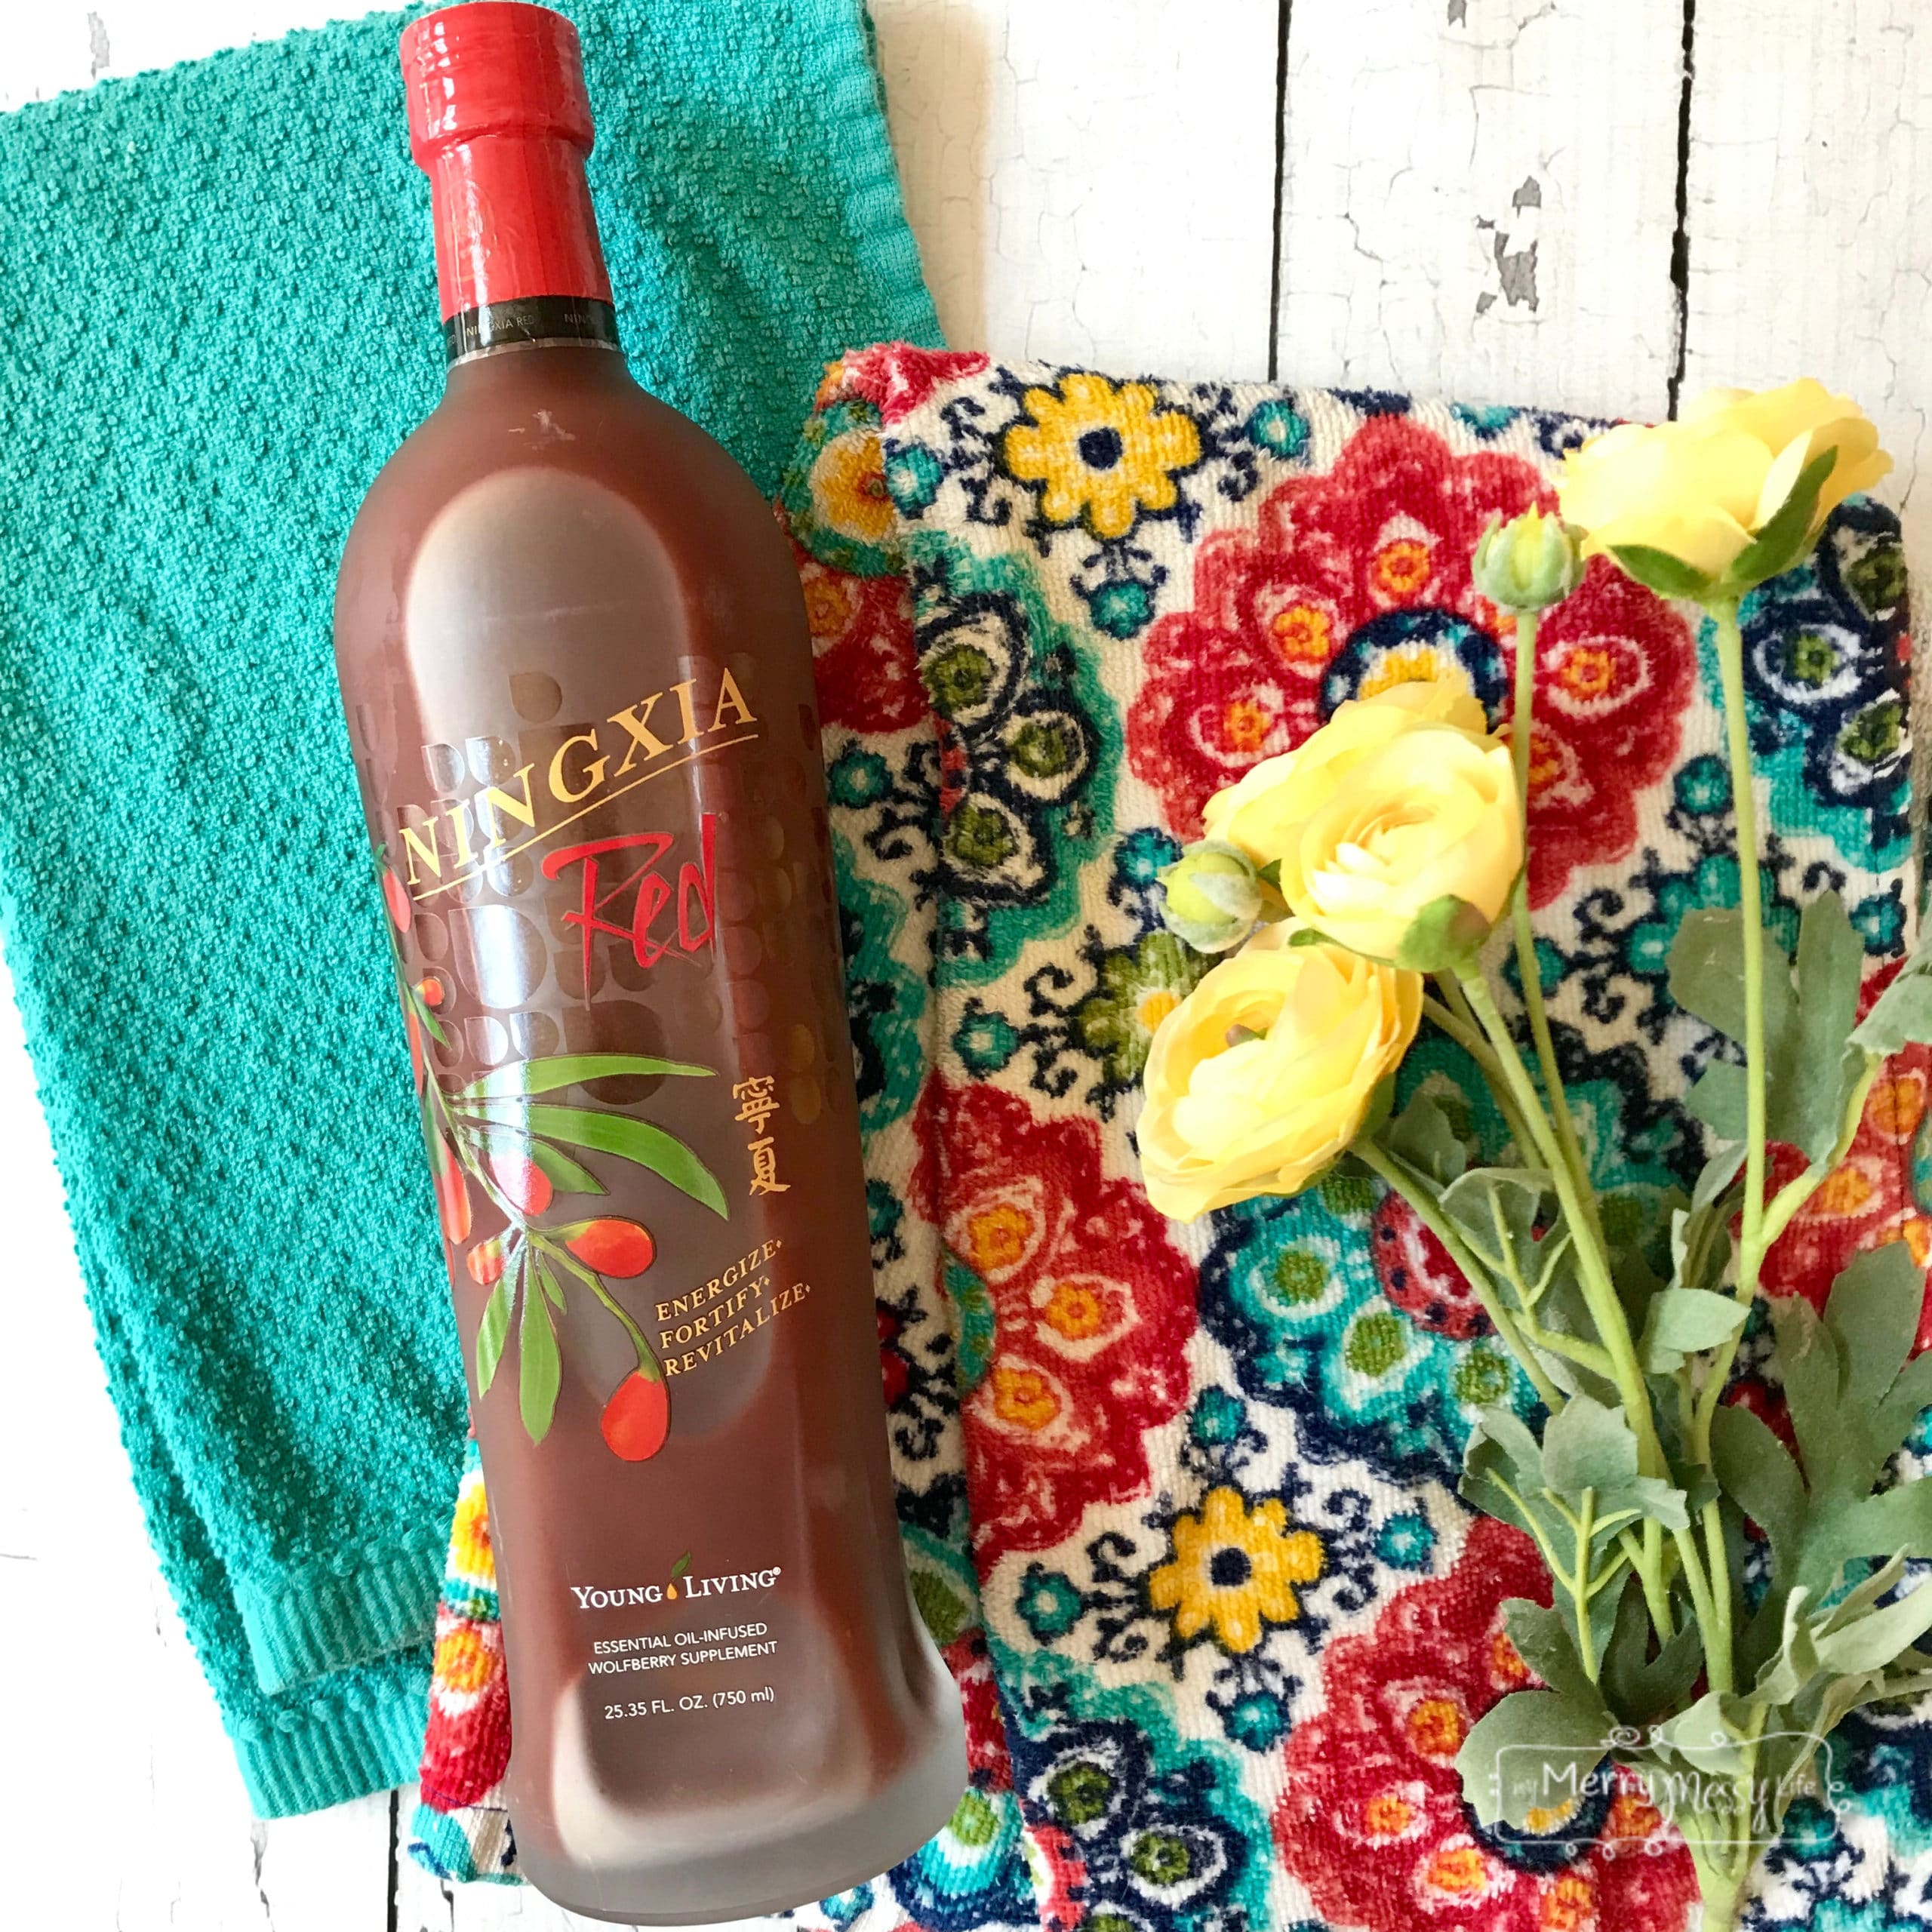 Ningxia Red - a super antioxidant superfood supplement from Young Living that helps support immunity, eye health, hair, skin and nails